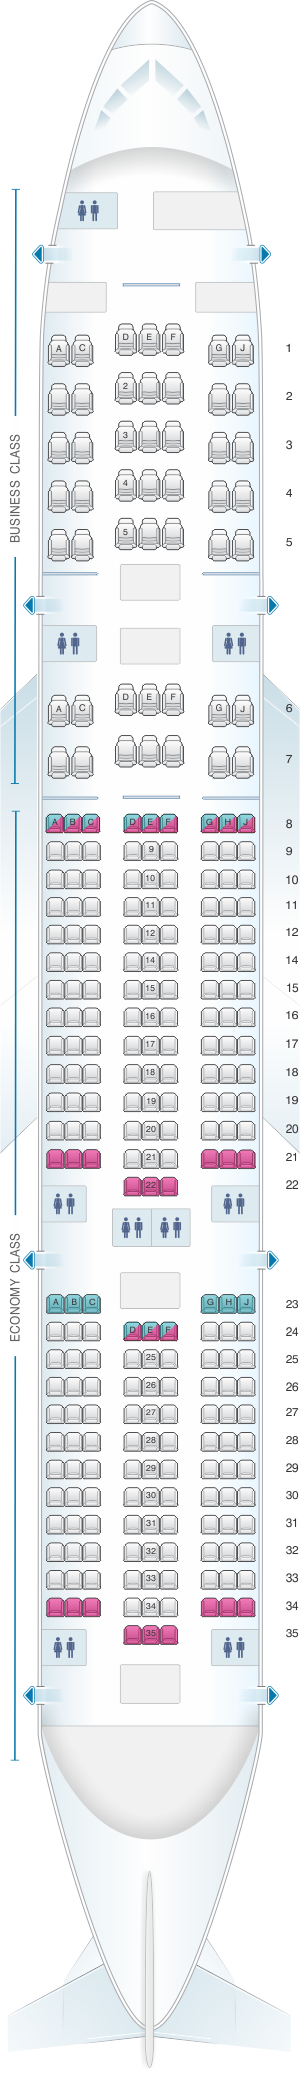 Seat map for Aeromexico Boeing B777 200ER